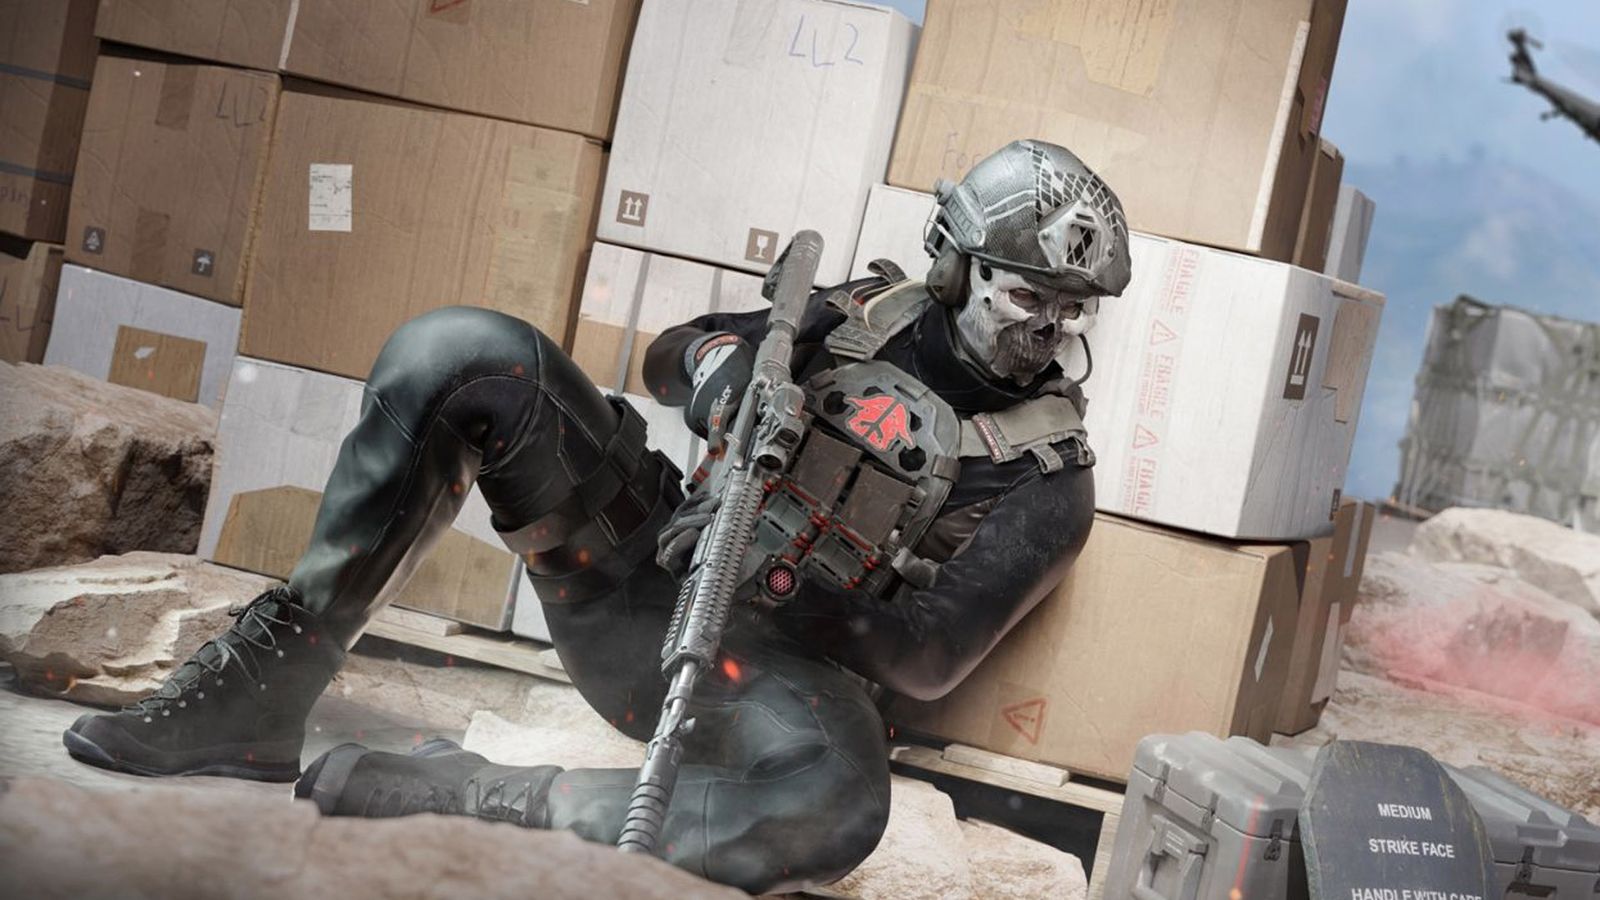 Warzone player taking cover next to boxes